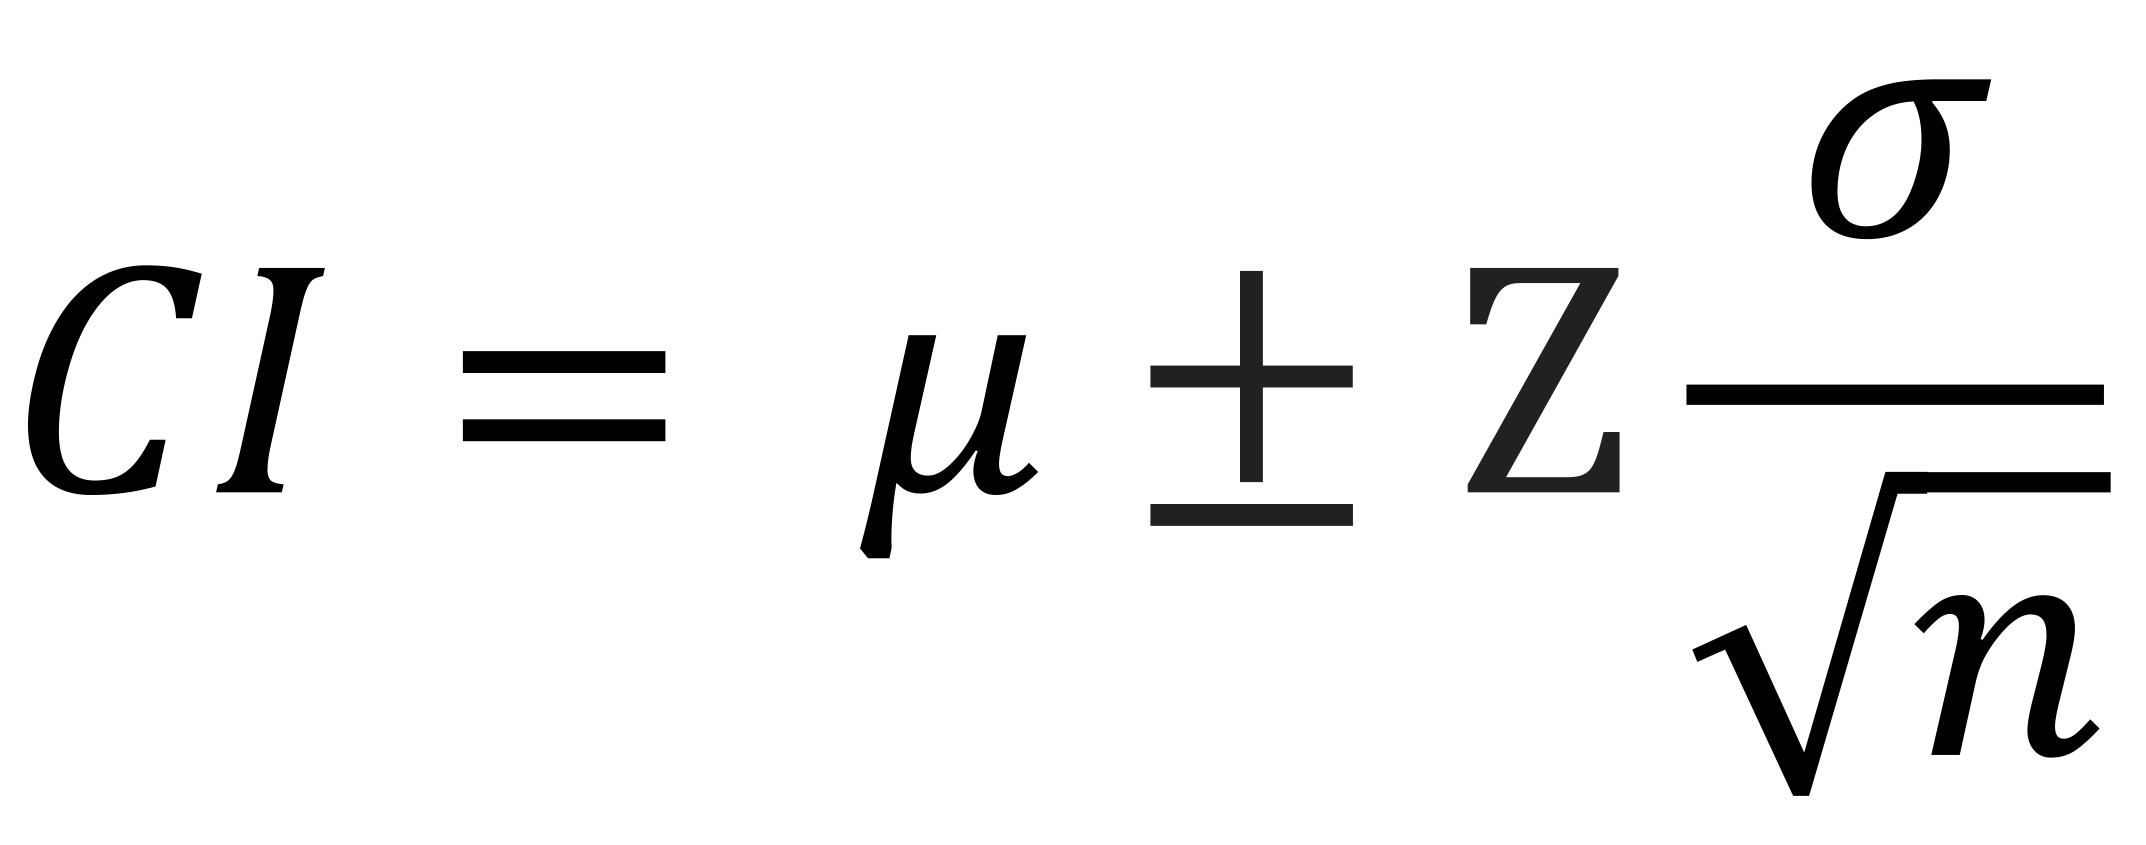 Confidence Interval Equation for Known Population